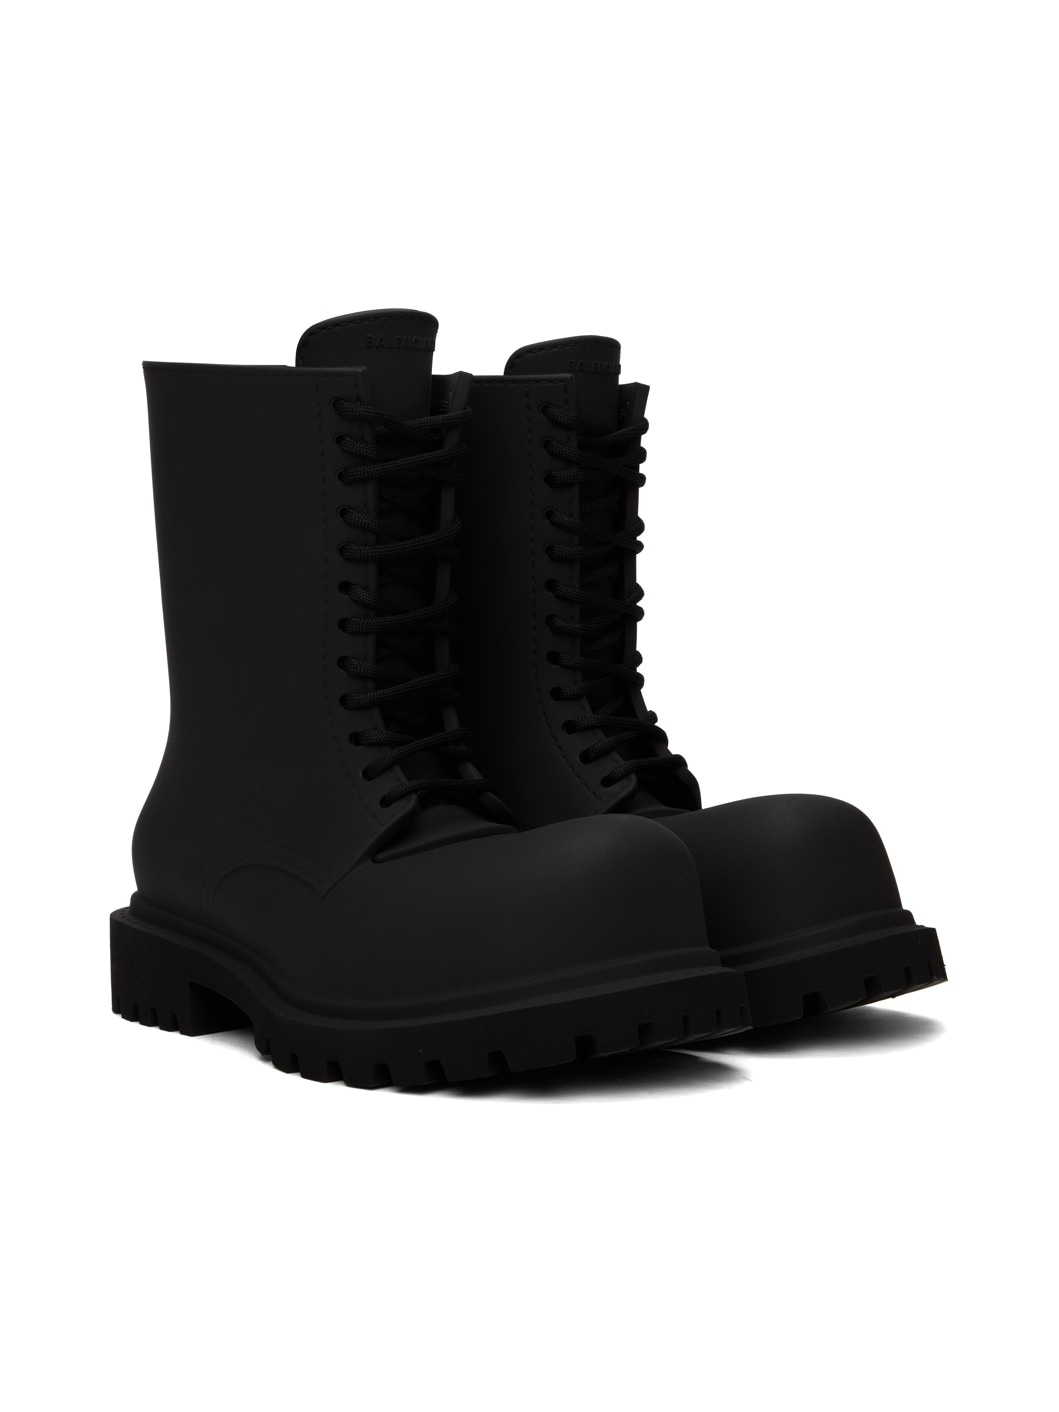 Black Steroid Boots - 4